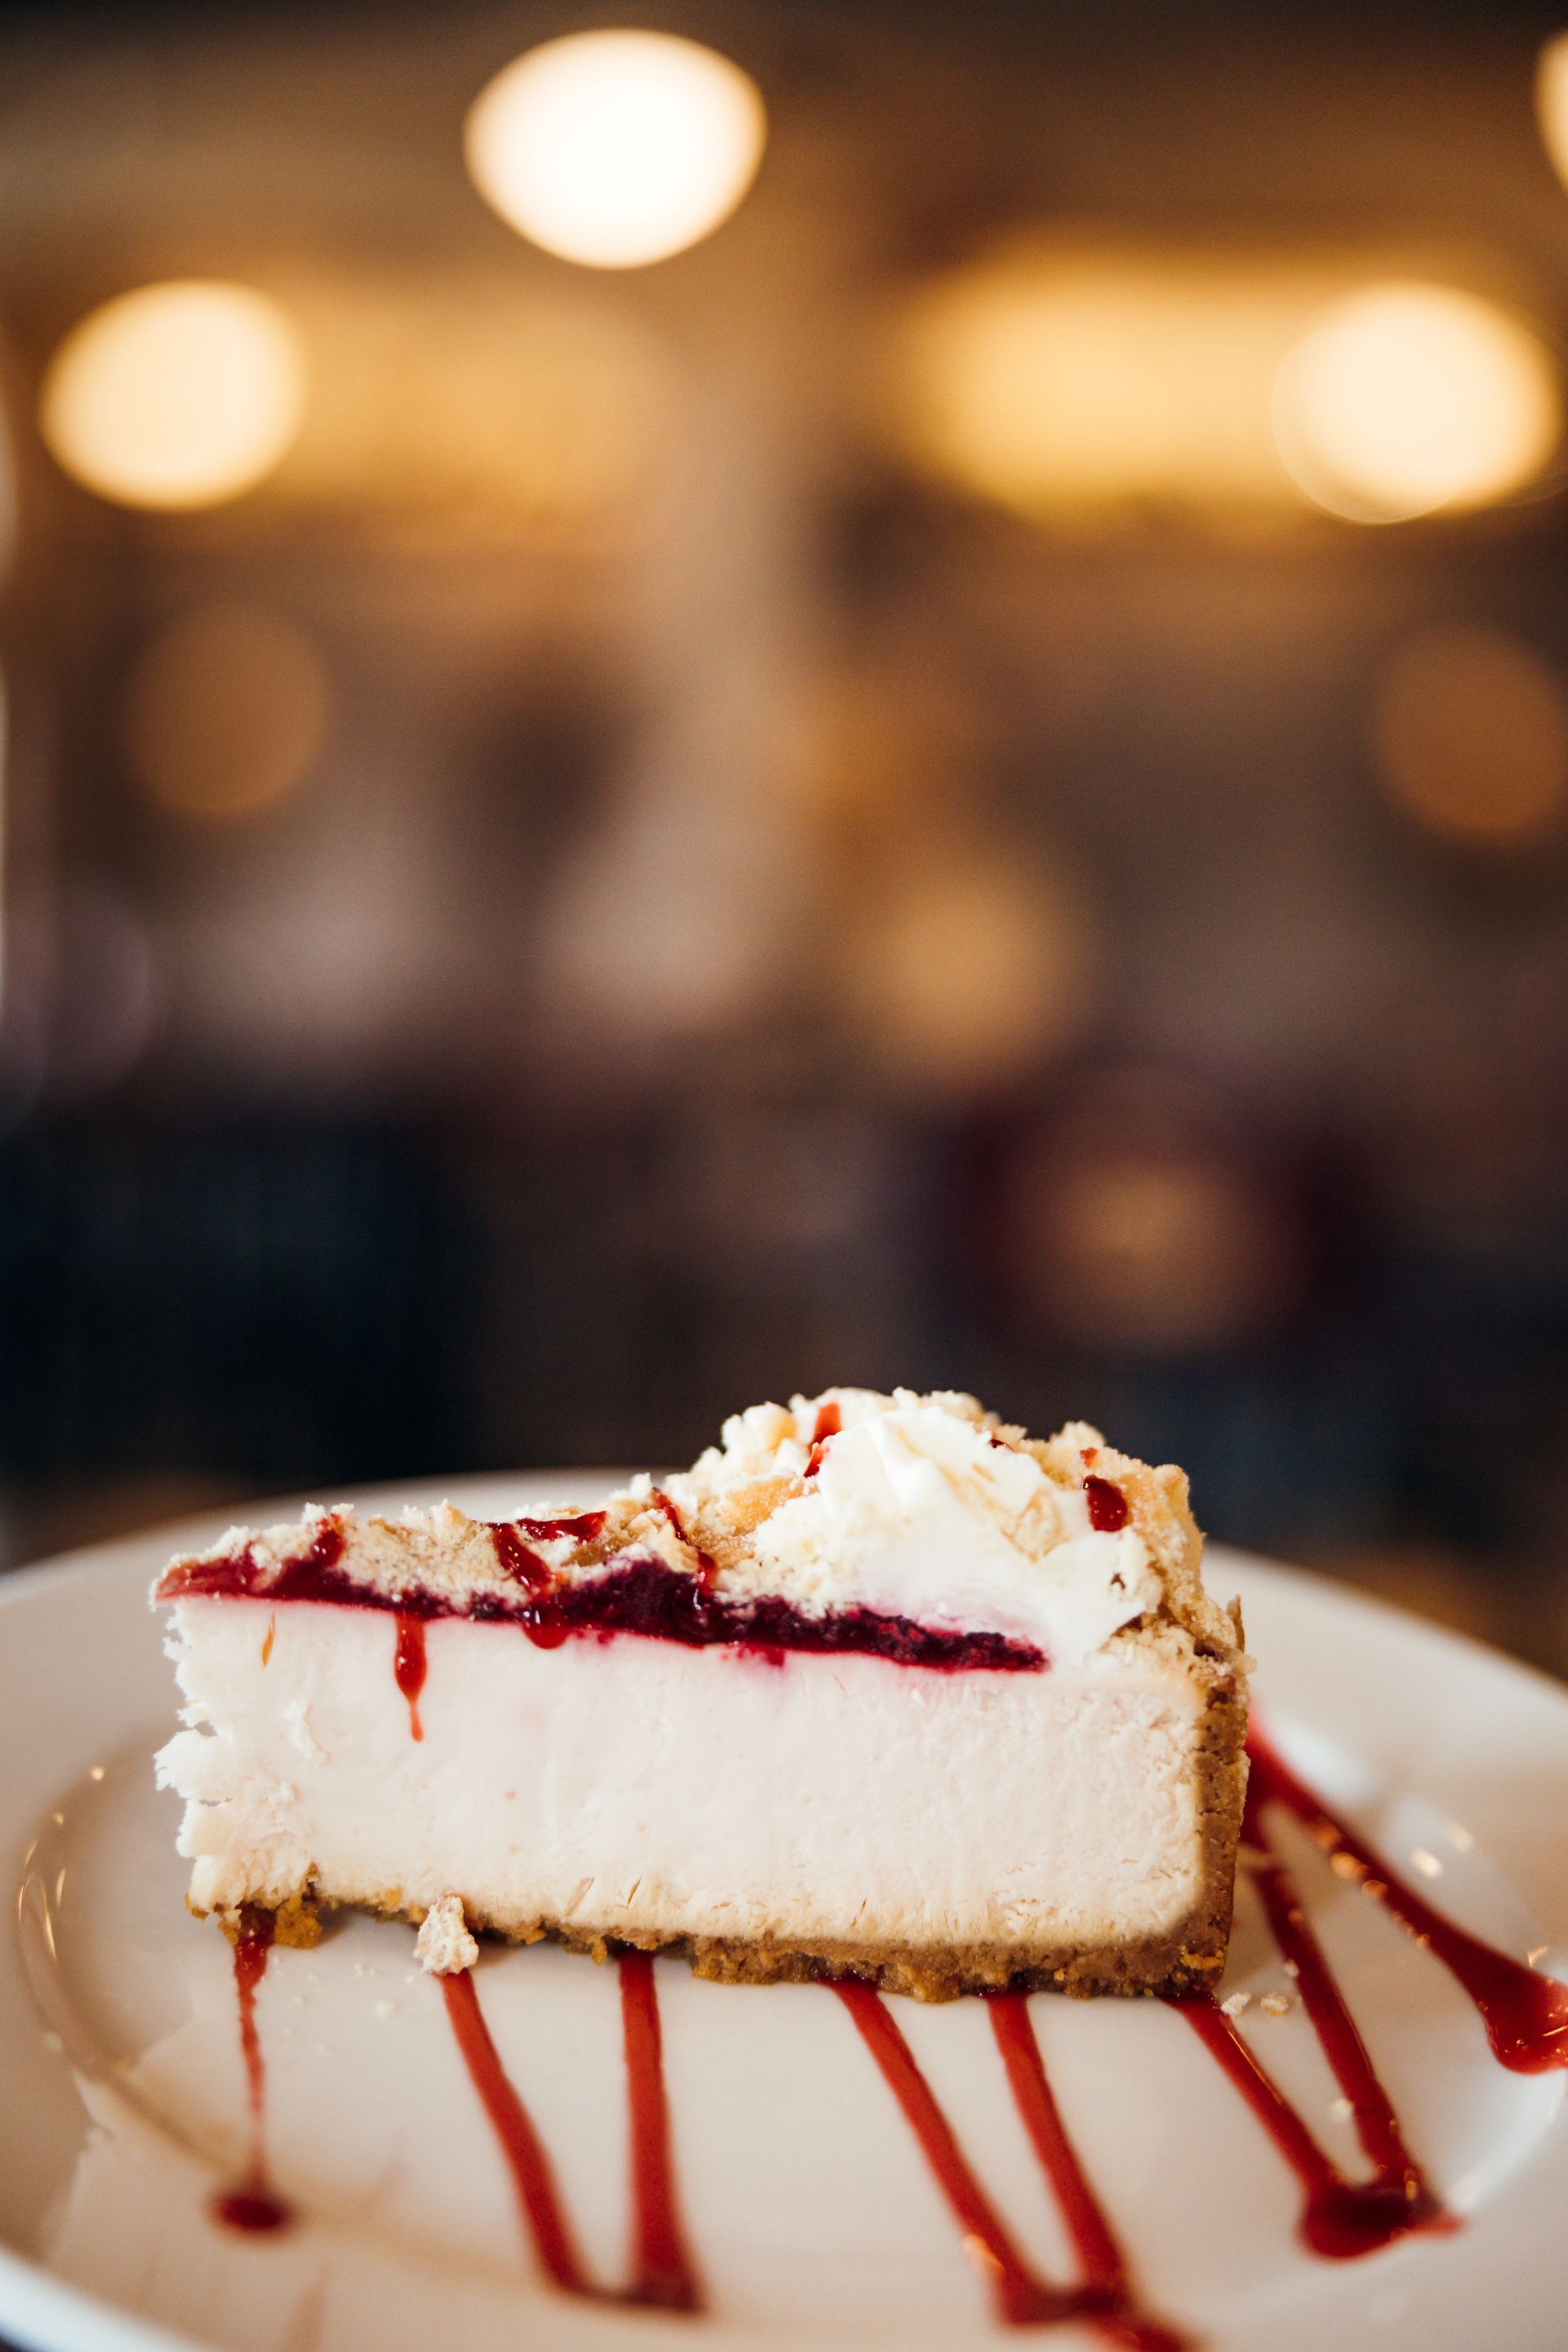 Visit the Hill in Holts Summit, MO to Enjoy Our Tasty Dessert Offerings, Including Cheesecake.